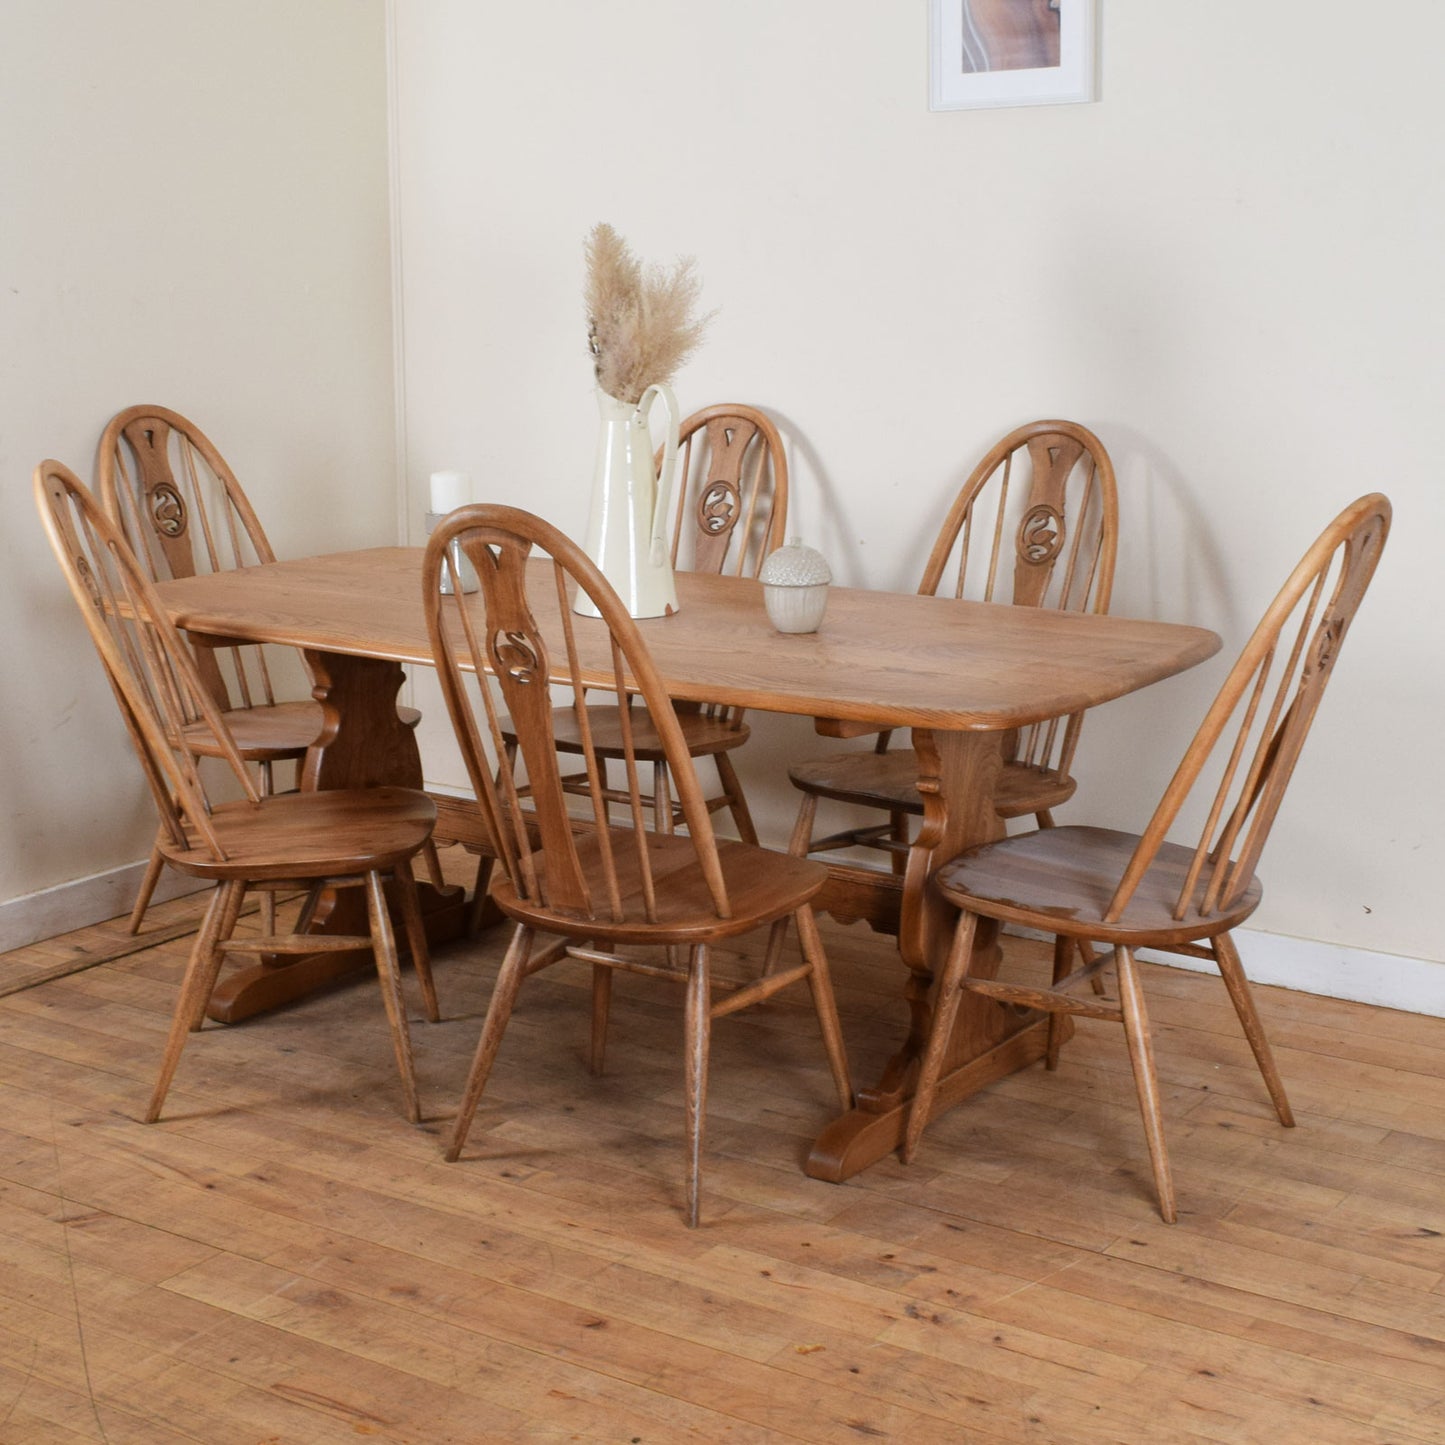 Ercol Table and 6 chairs